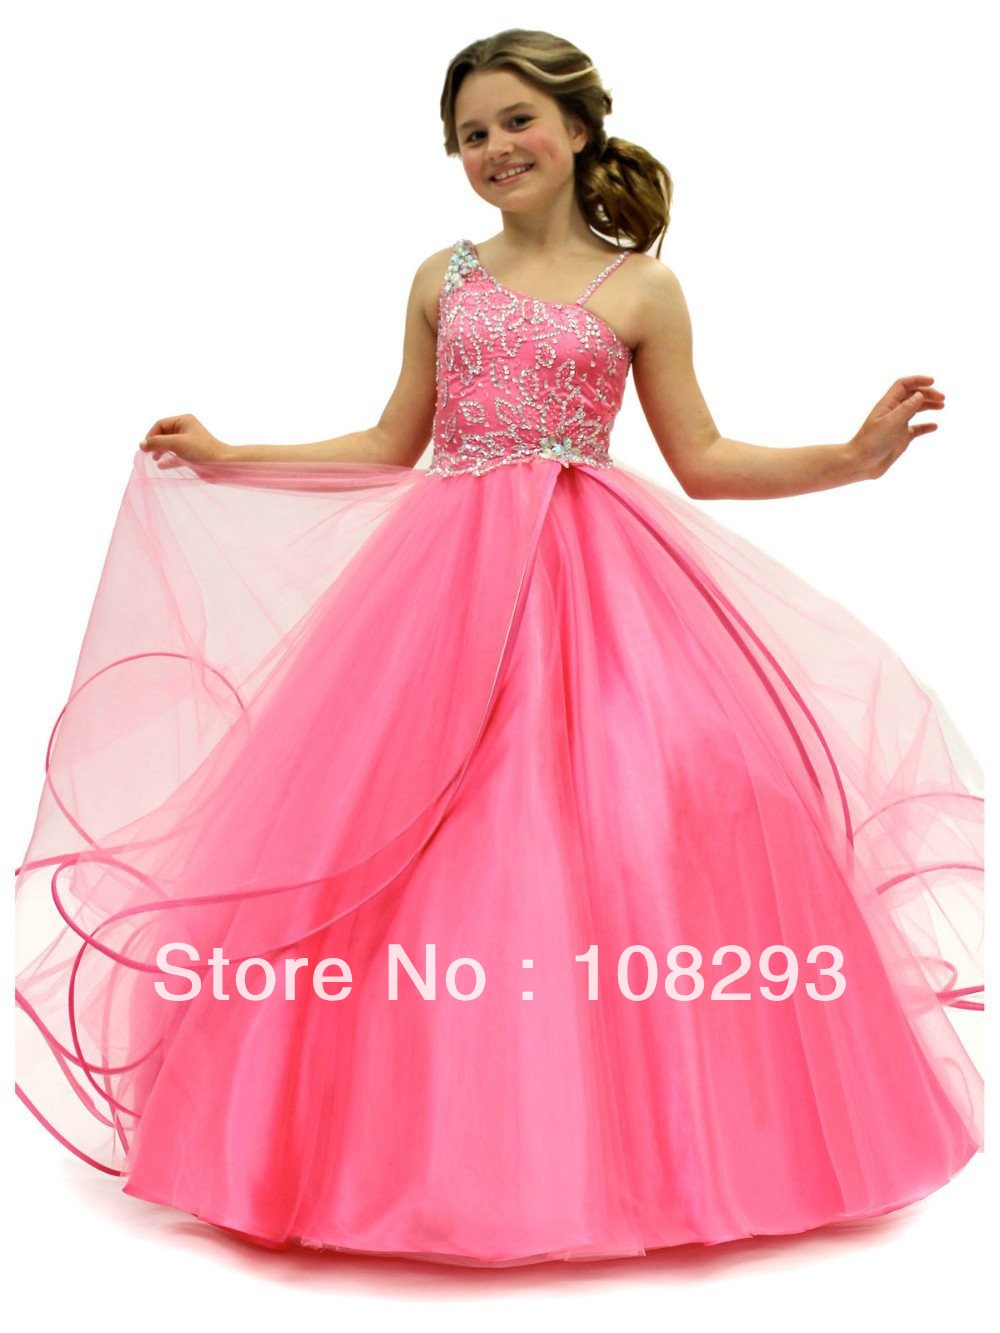 National Pageant Gown Sugar Pageant Flower girl Dresses Children Pageant Ball Gown Custom